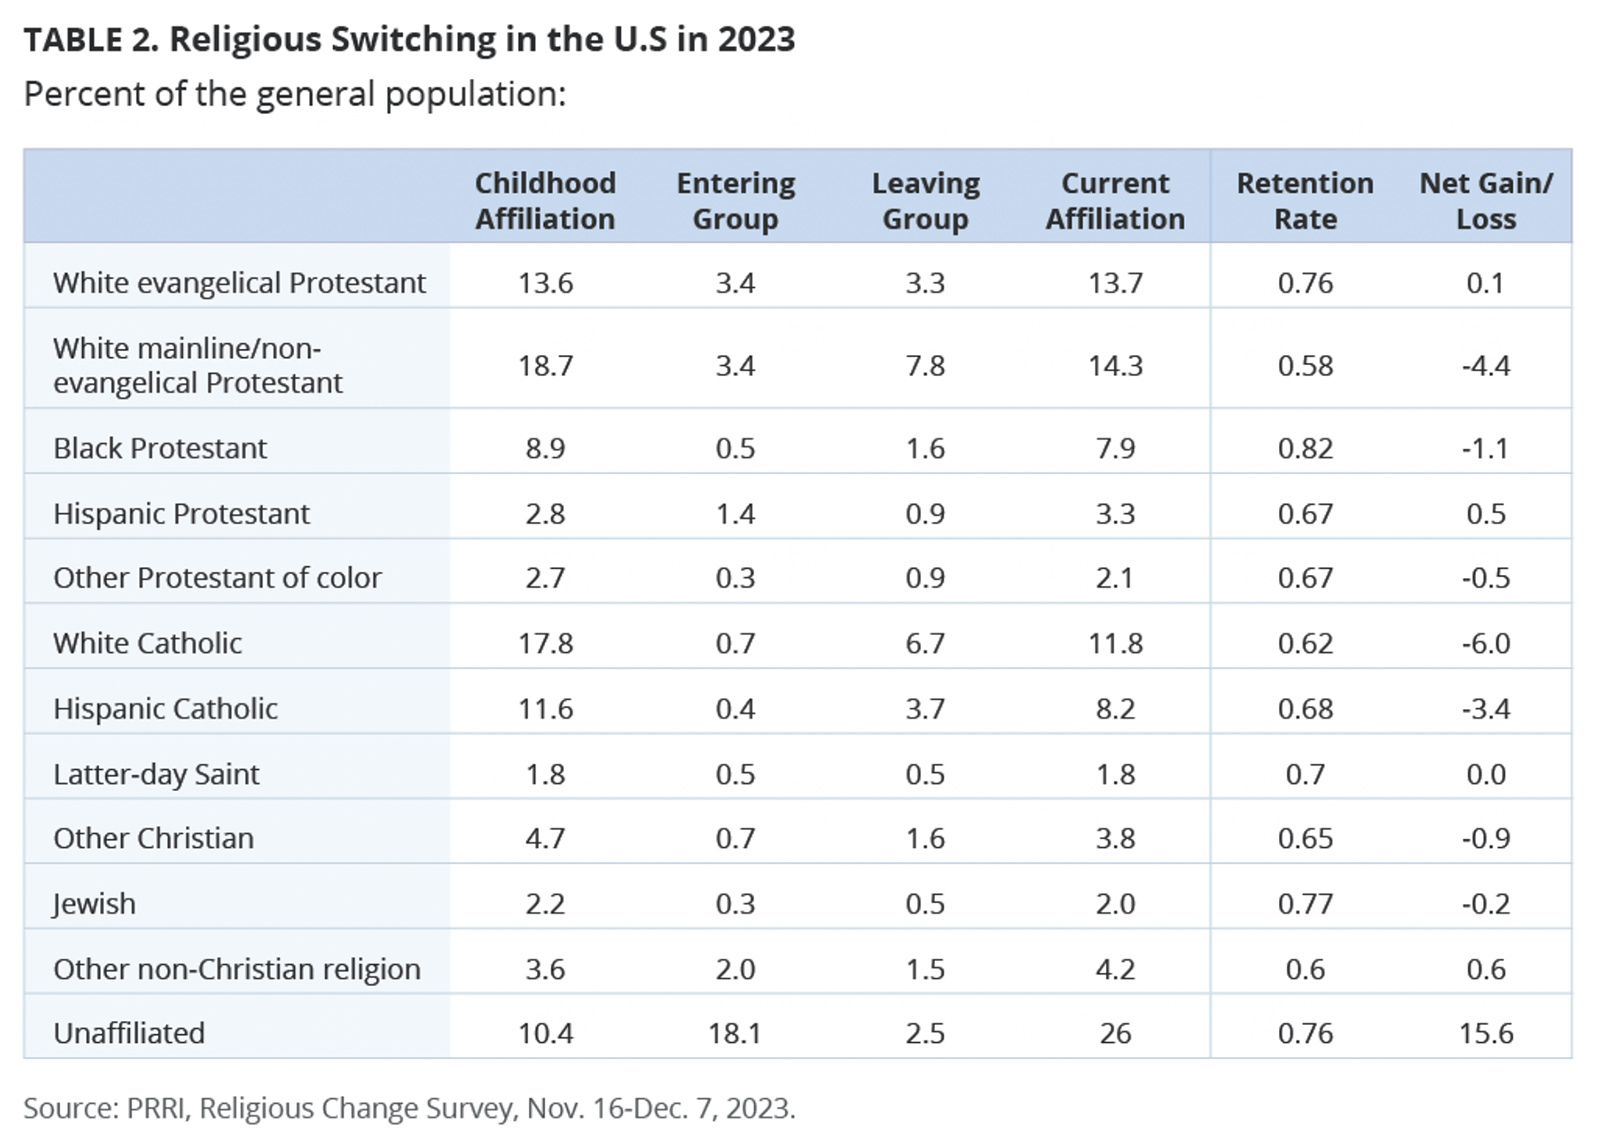 "Religious Switching in the U.S. in 2023" (Graphic courtesy PRRI)